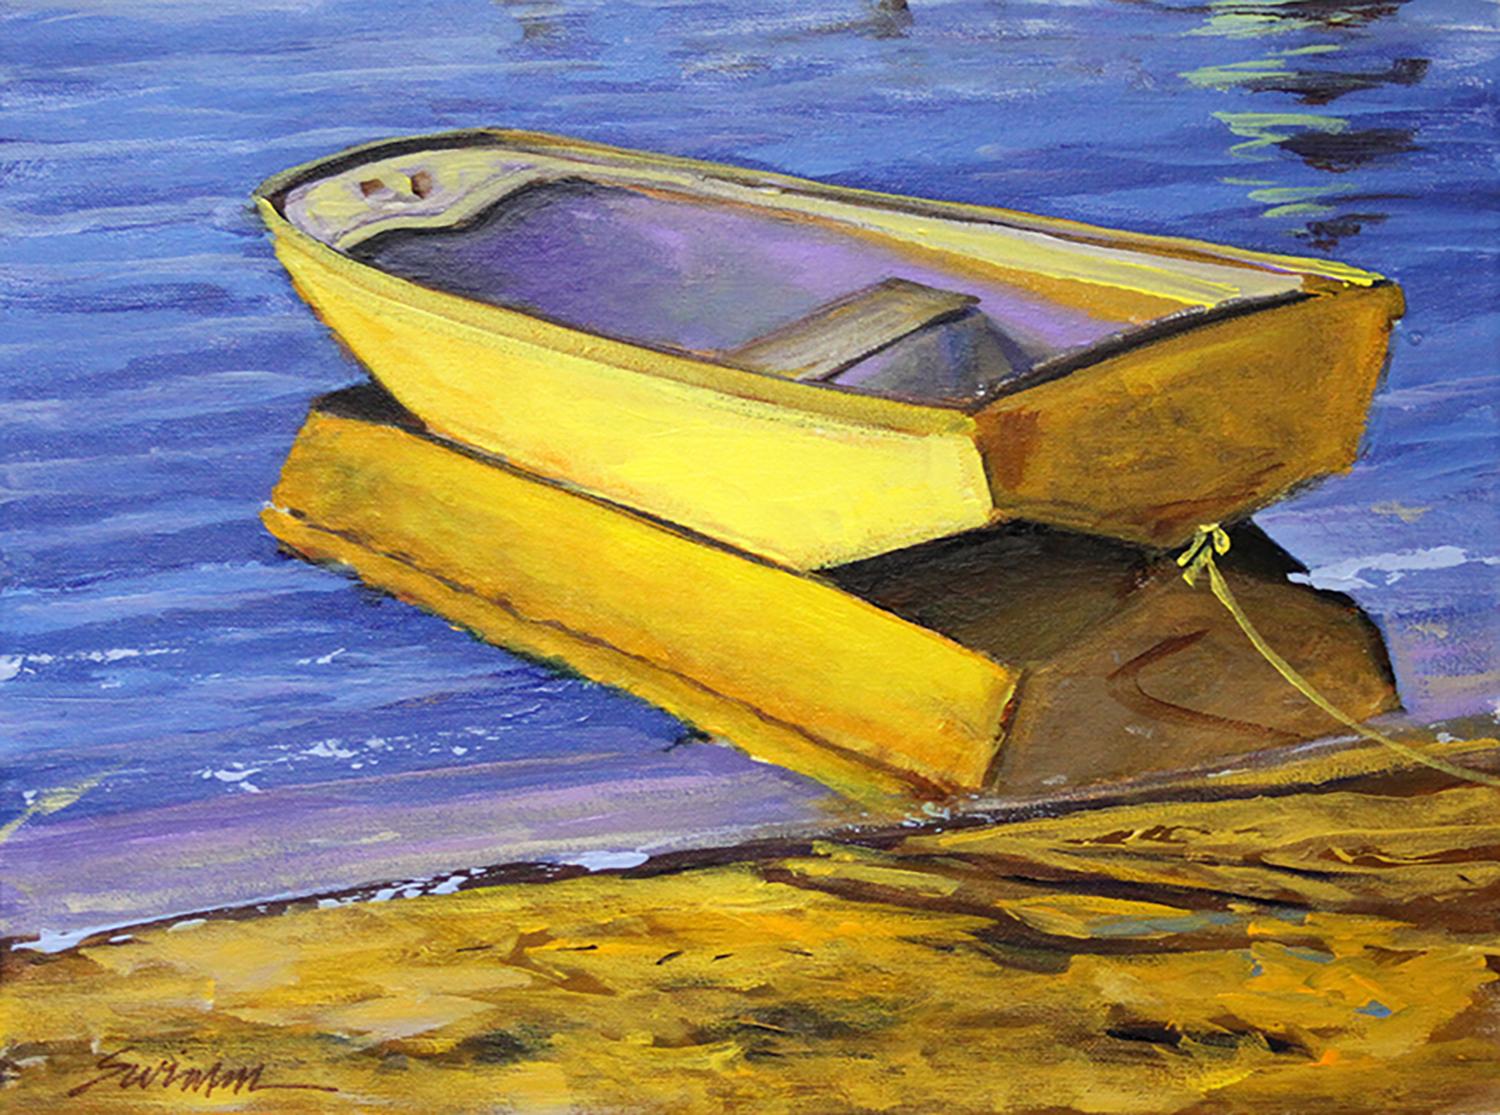 Tom Swimm Landscape Painting -  "Newport Gold" Wooden Boat Tied Up On The Beach With Water Reflections